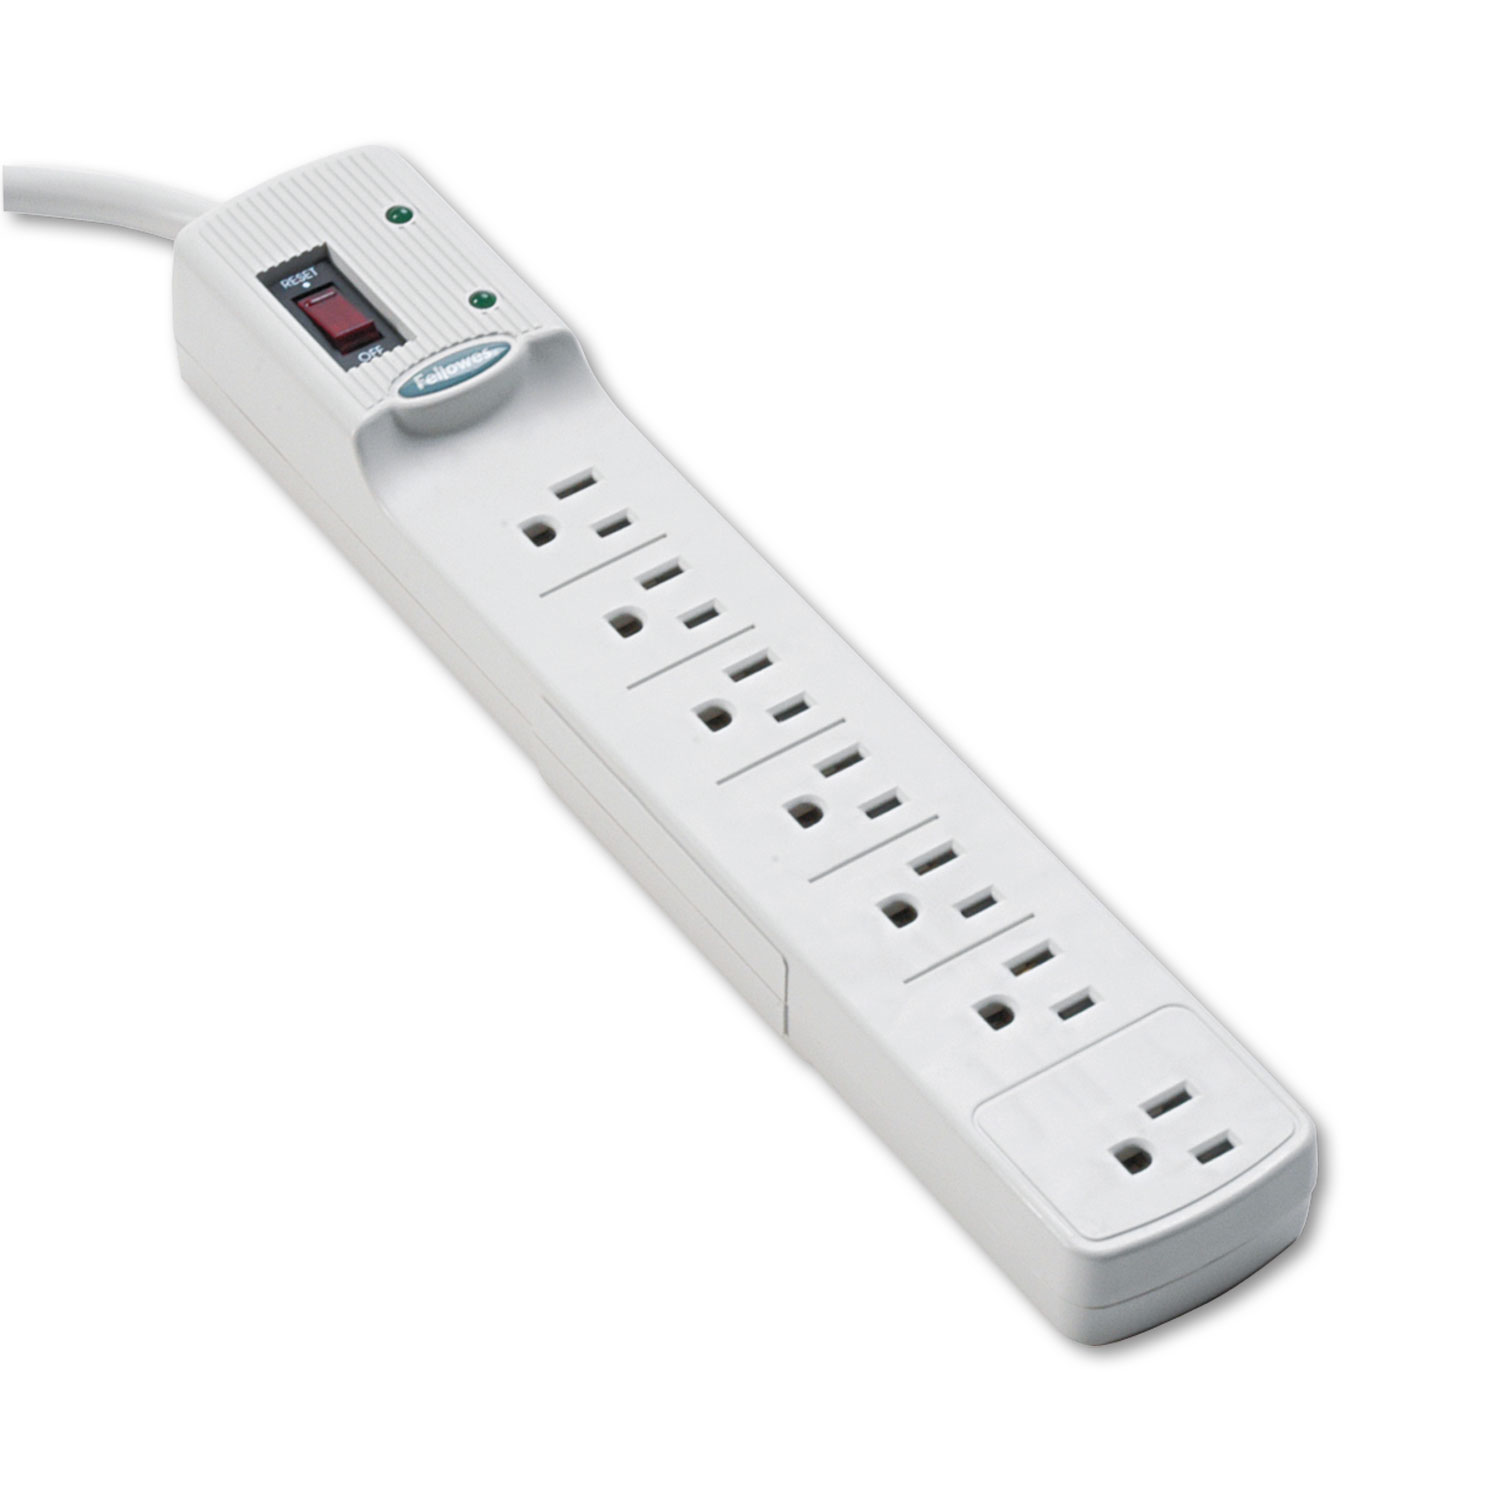  Fellowes 99004 Advanced Computer Series Surge Protector, 7 Outlets, 6 ft Cord, 840 Joules (FEL99004) 